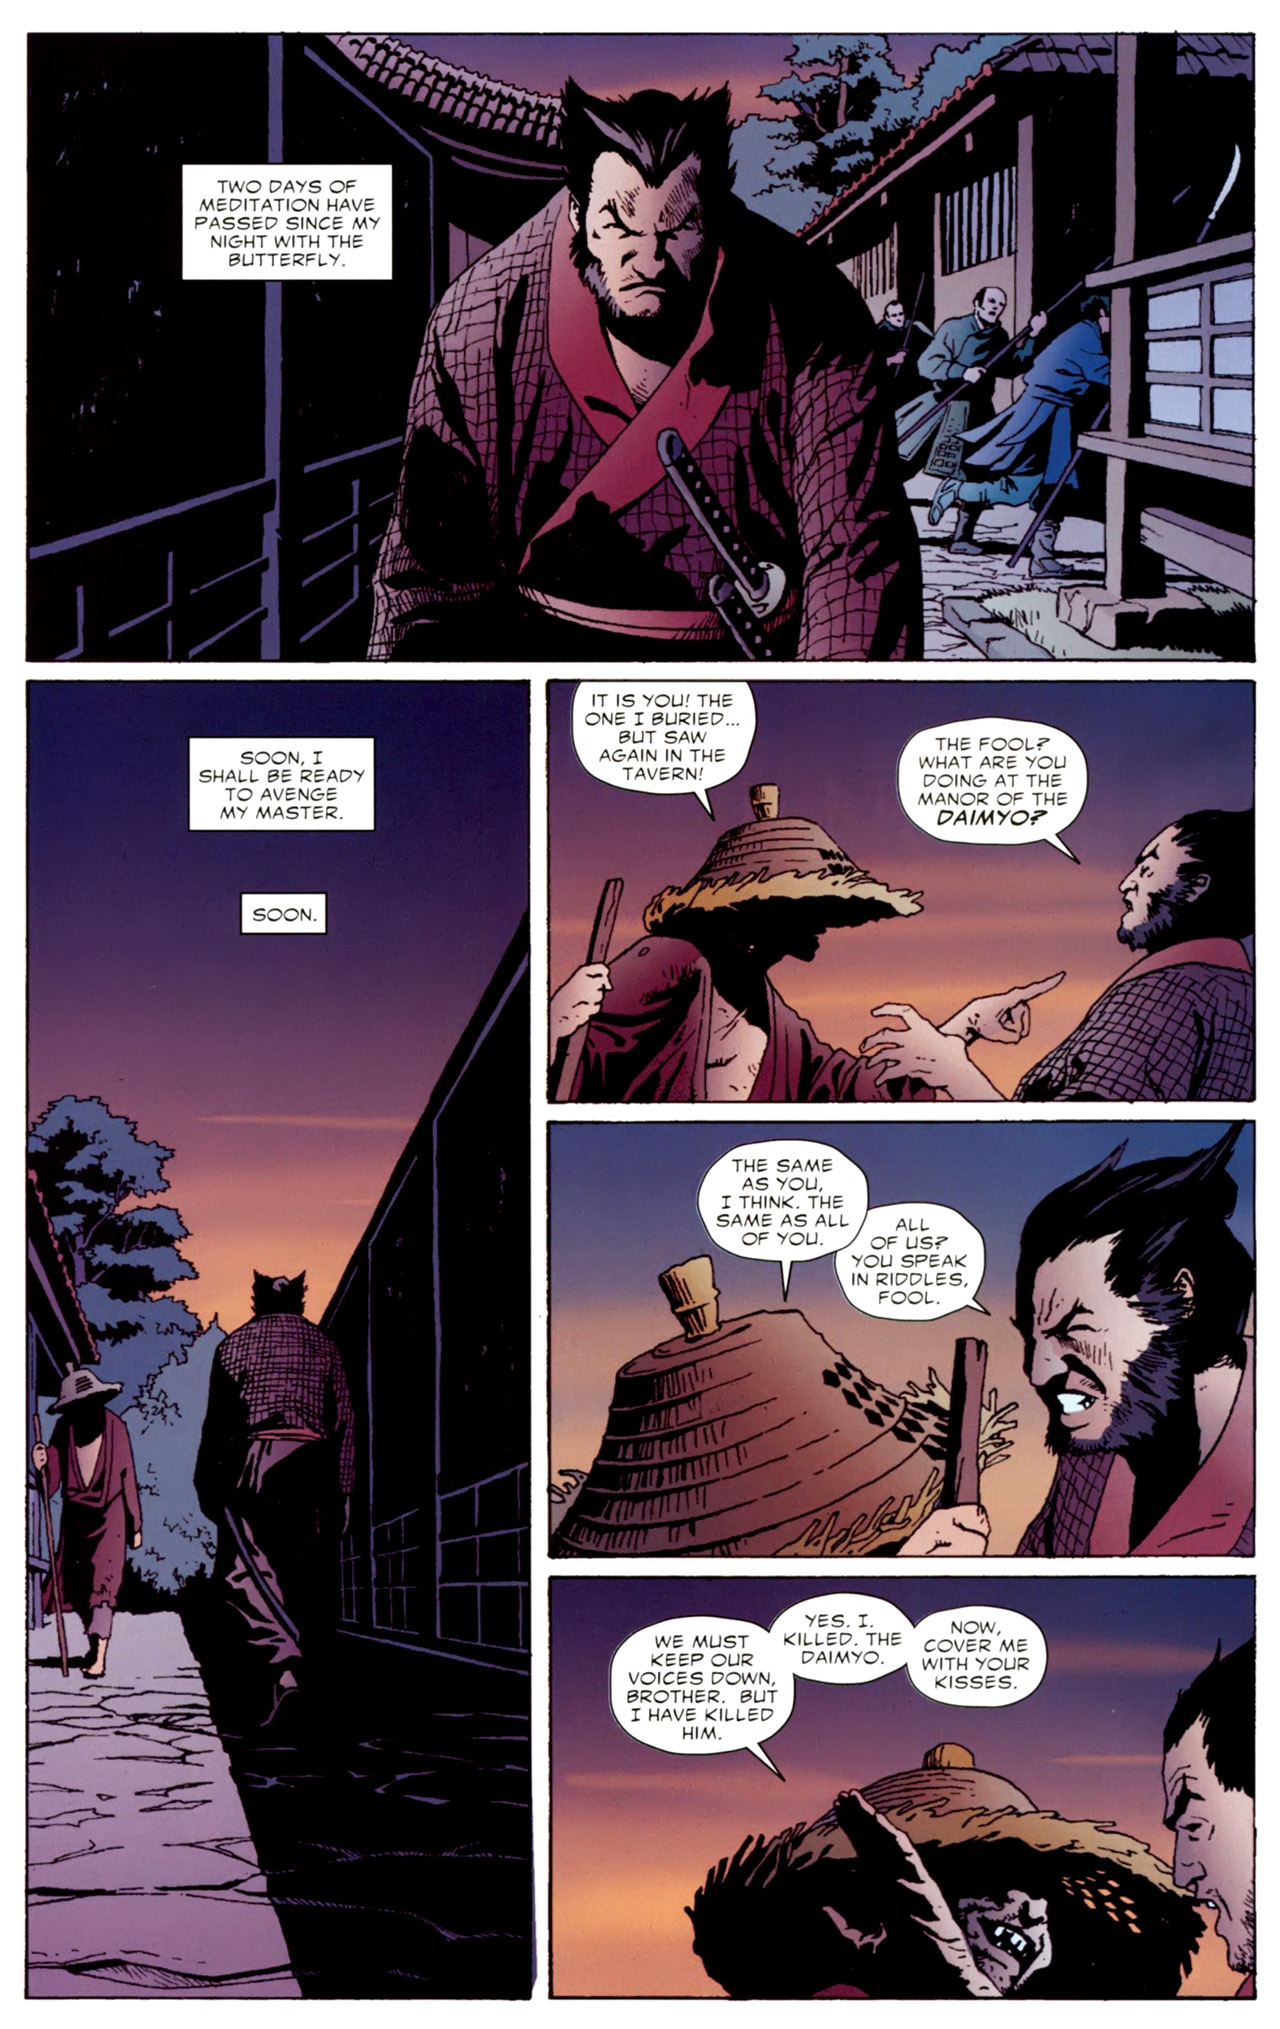 5 Ronin #5 - Chapter Five: The Way Of The Fool - Deadpool